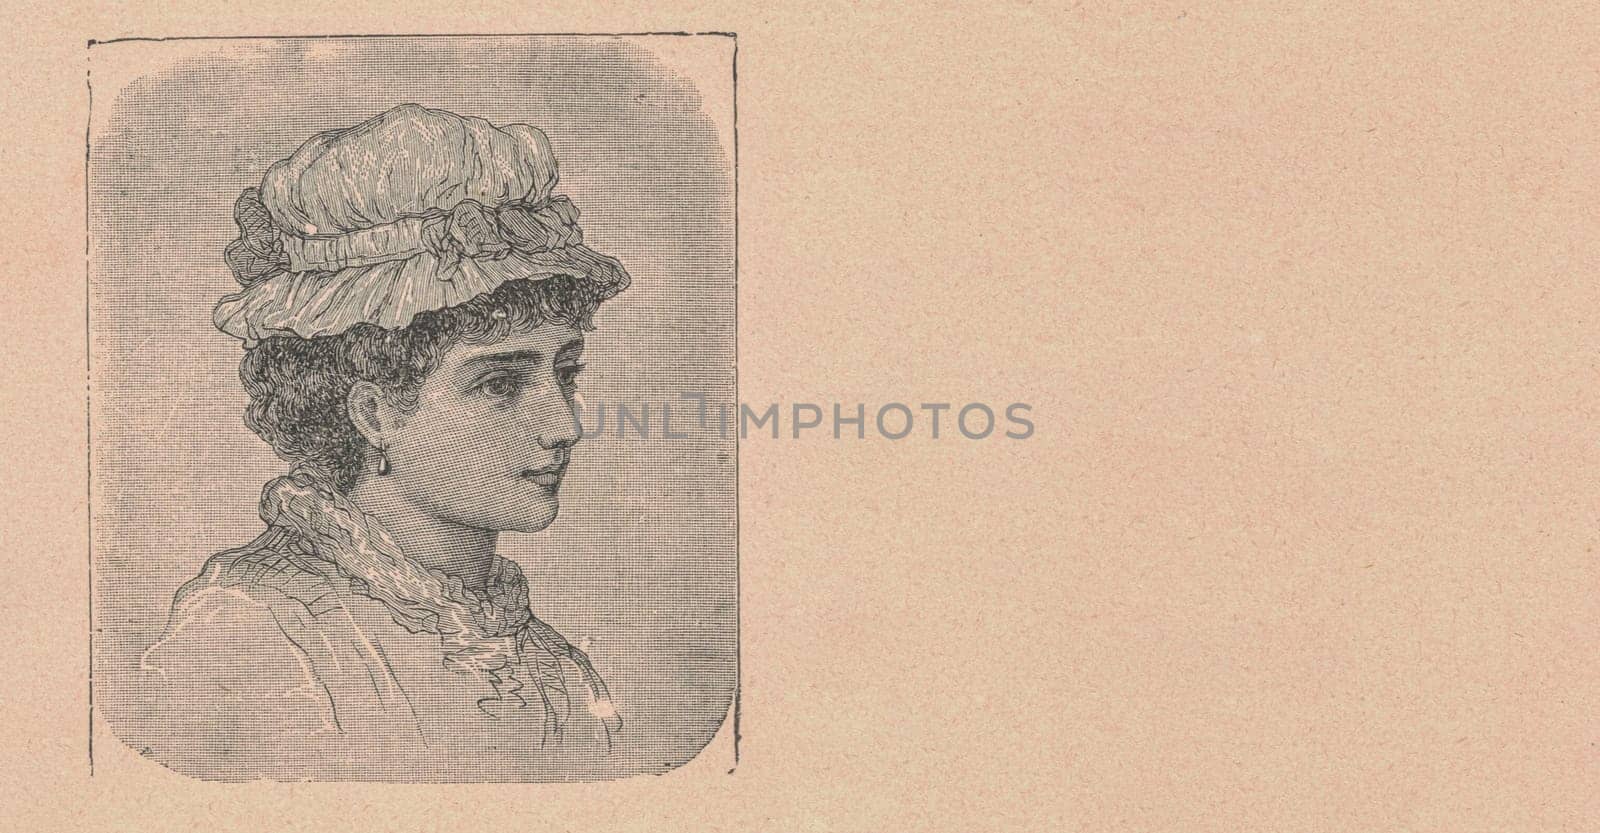 Black and white antique illustration shows a portrait of a young lady. Vintage drawing shows the portrait of the beautiful young woman. Old picture from fairy tale book. Storybook illustration published 1910.